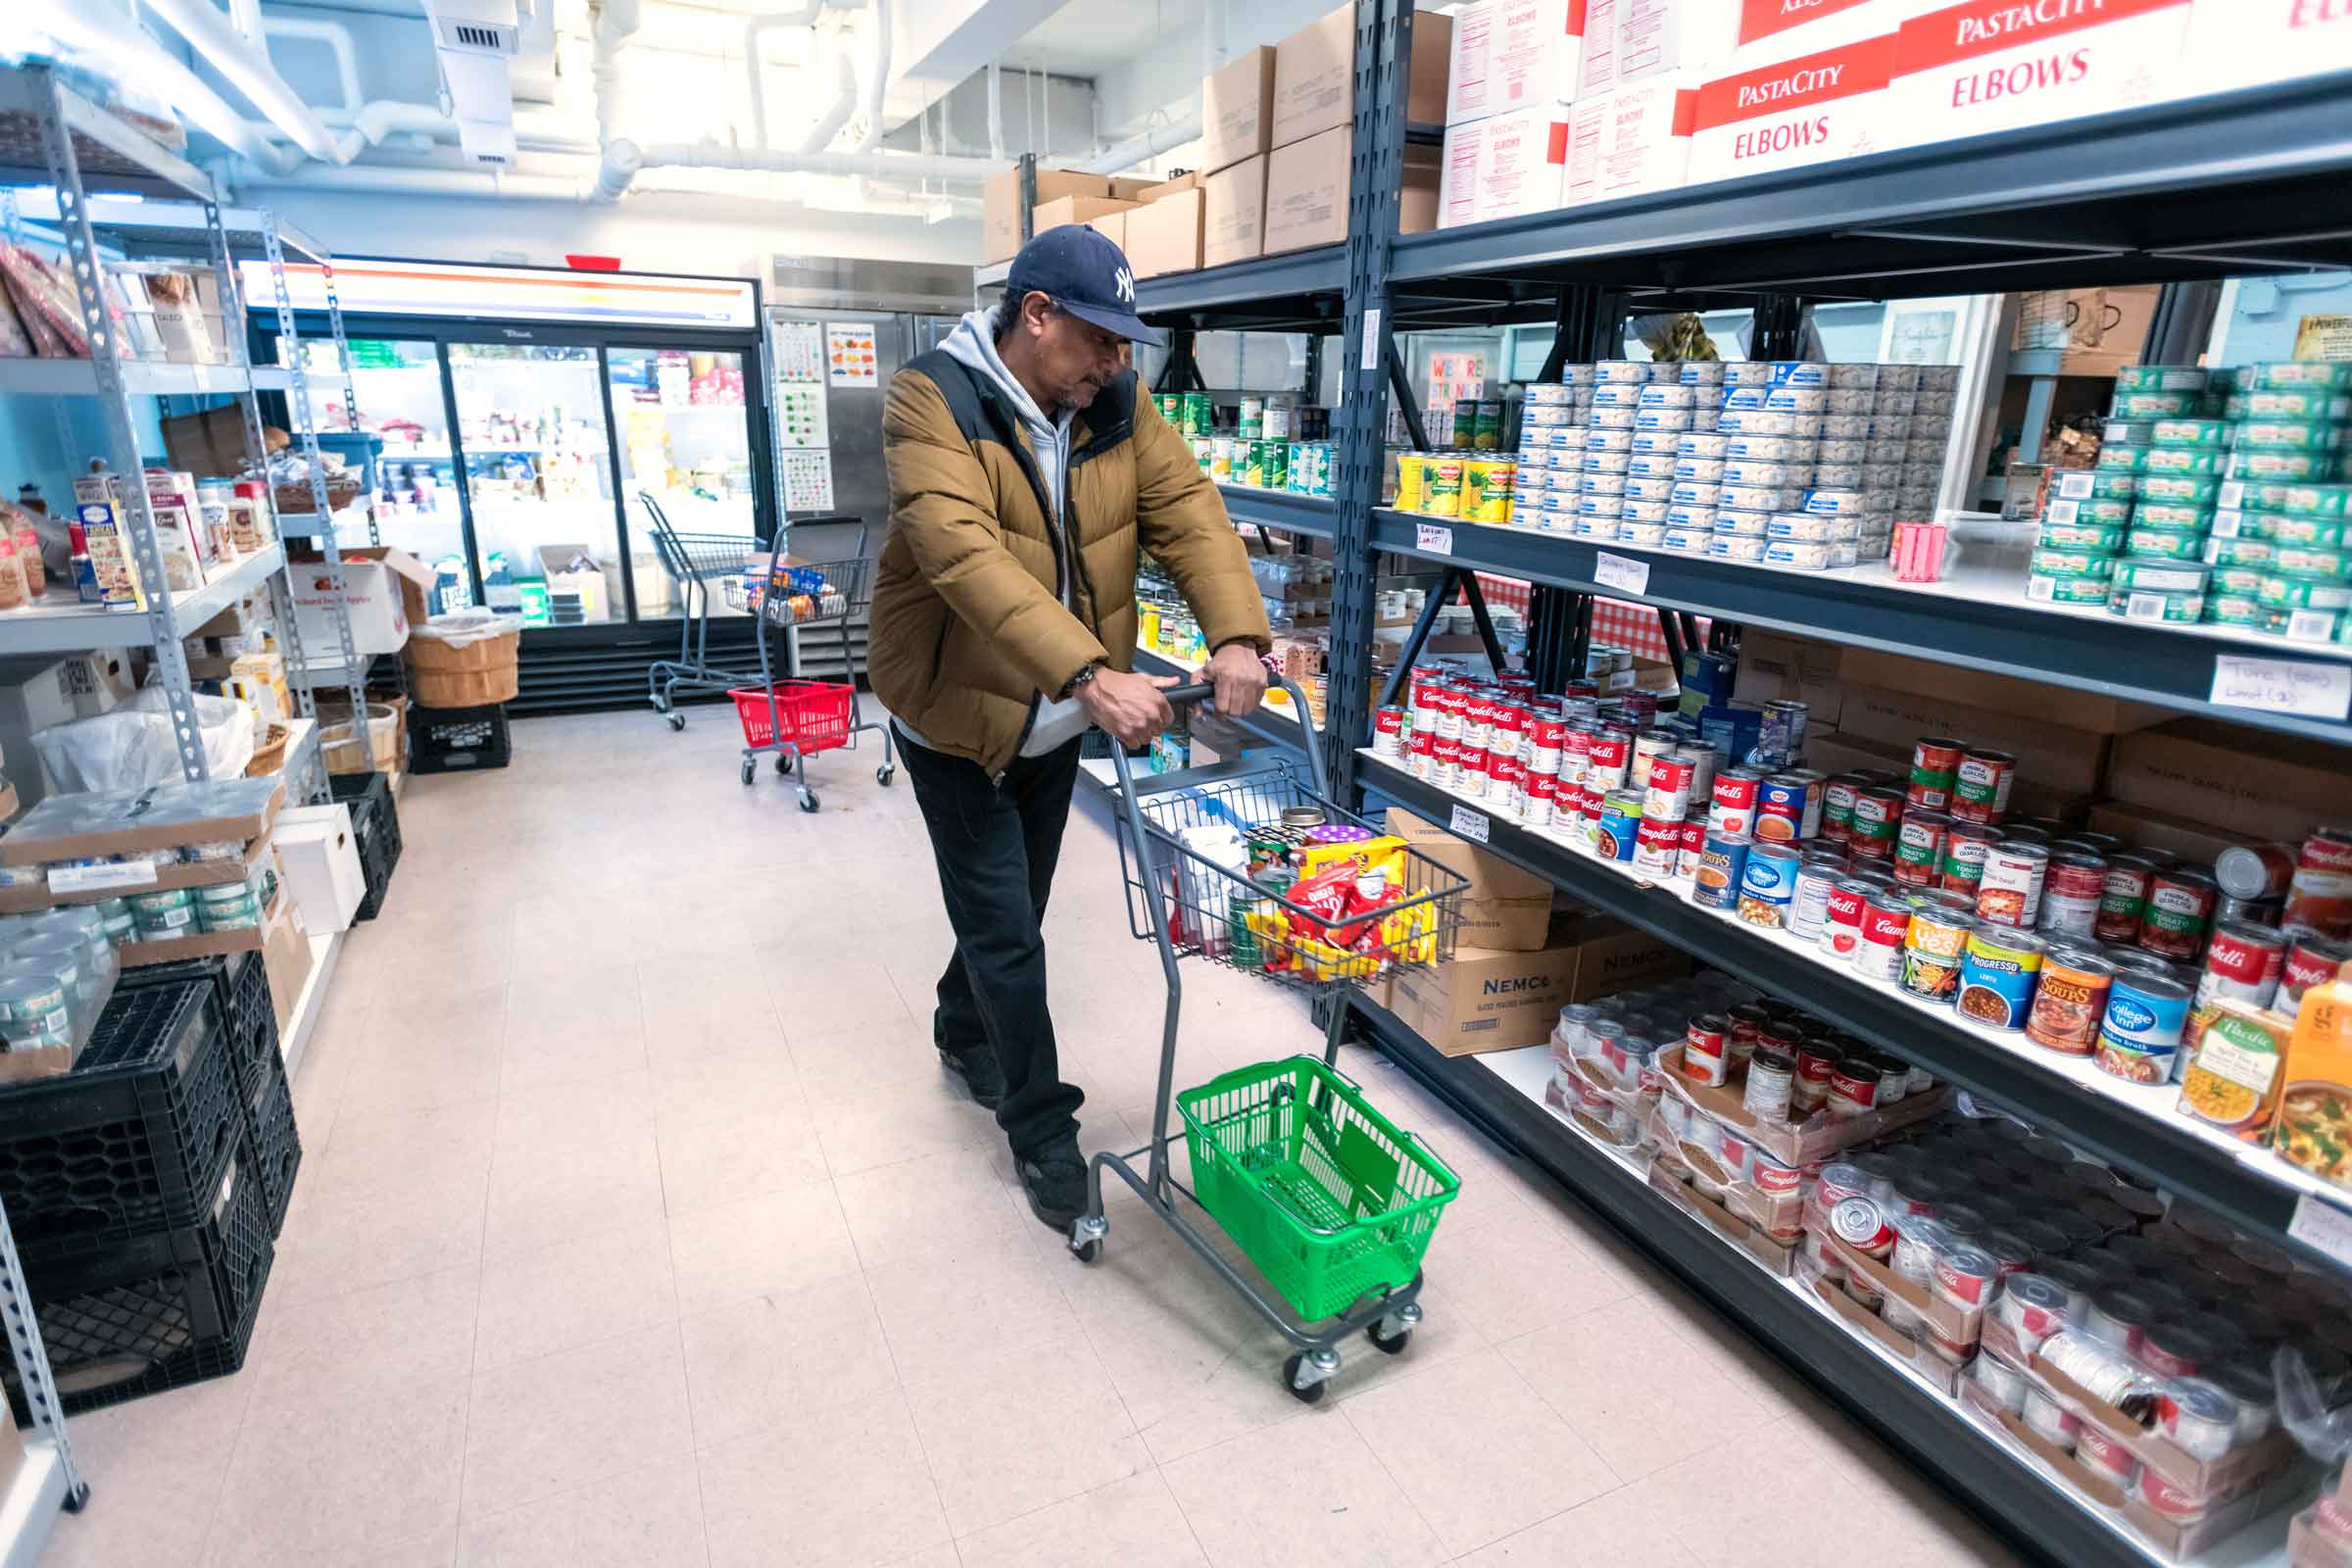 Person pushing a shopping cart down an isle with shelves of canned food 